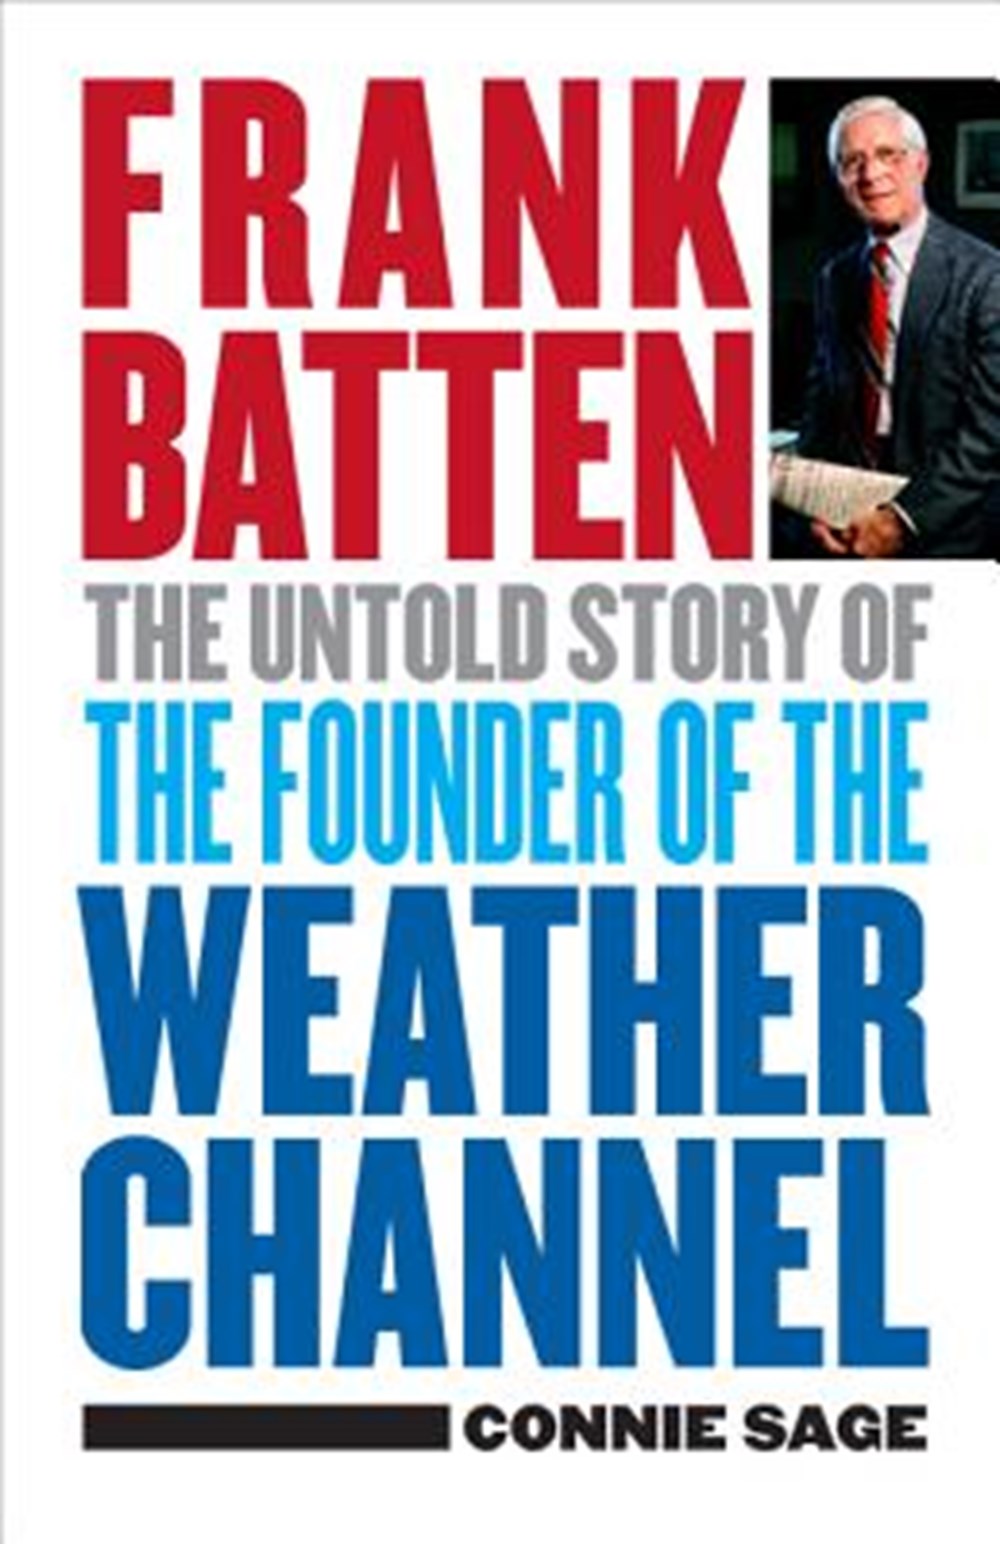 Frank Batten The Untold Story of the Founder of the Weather Channel